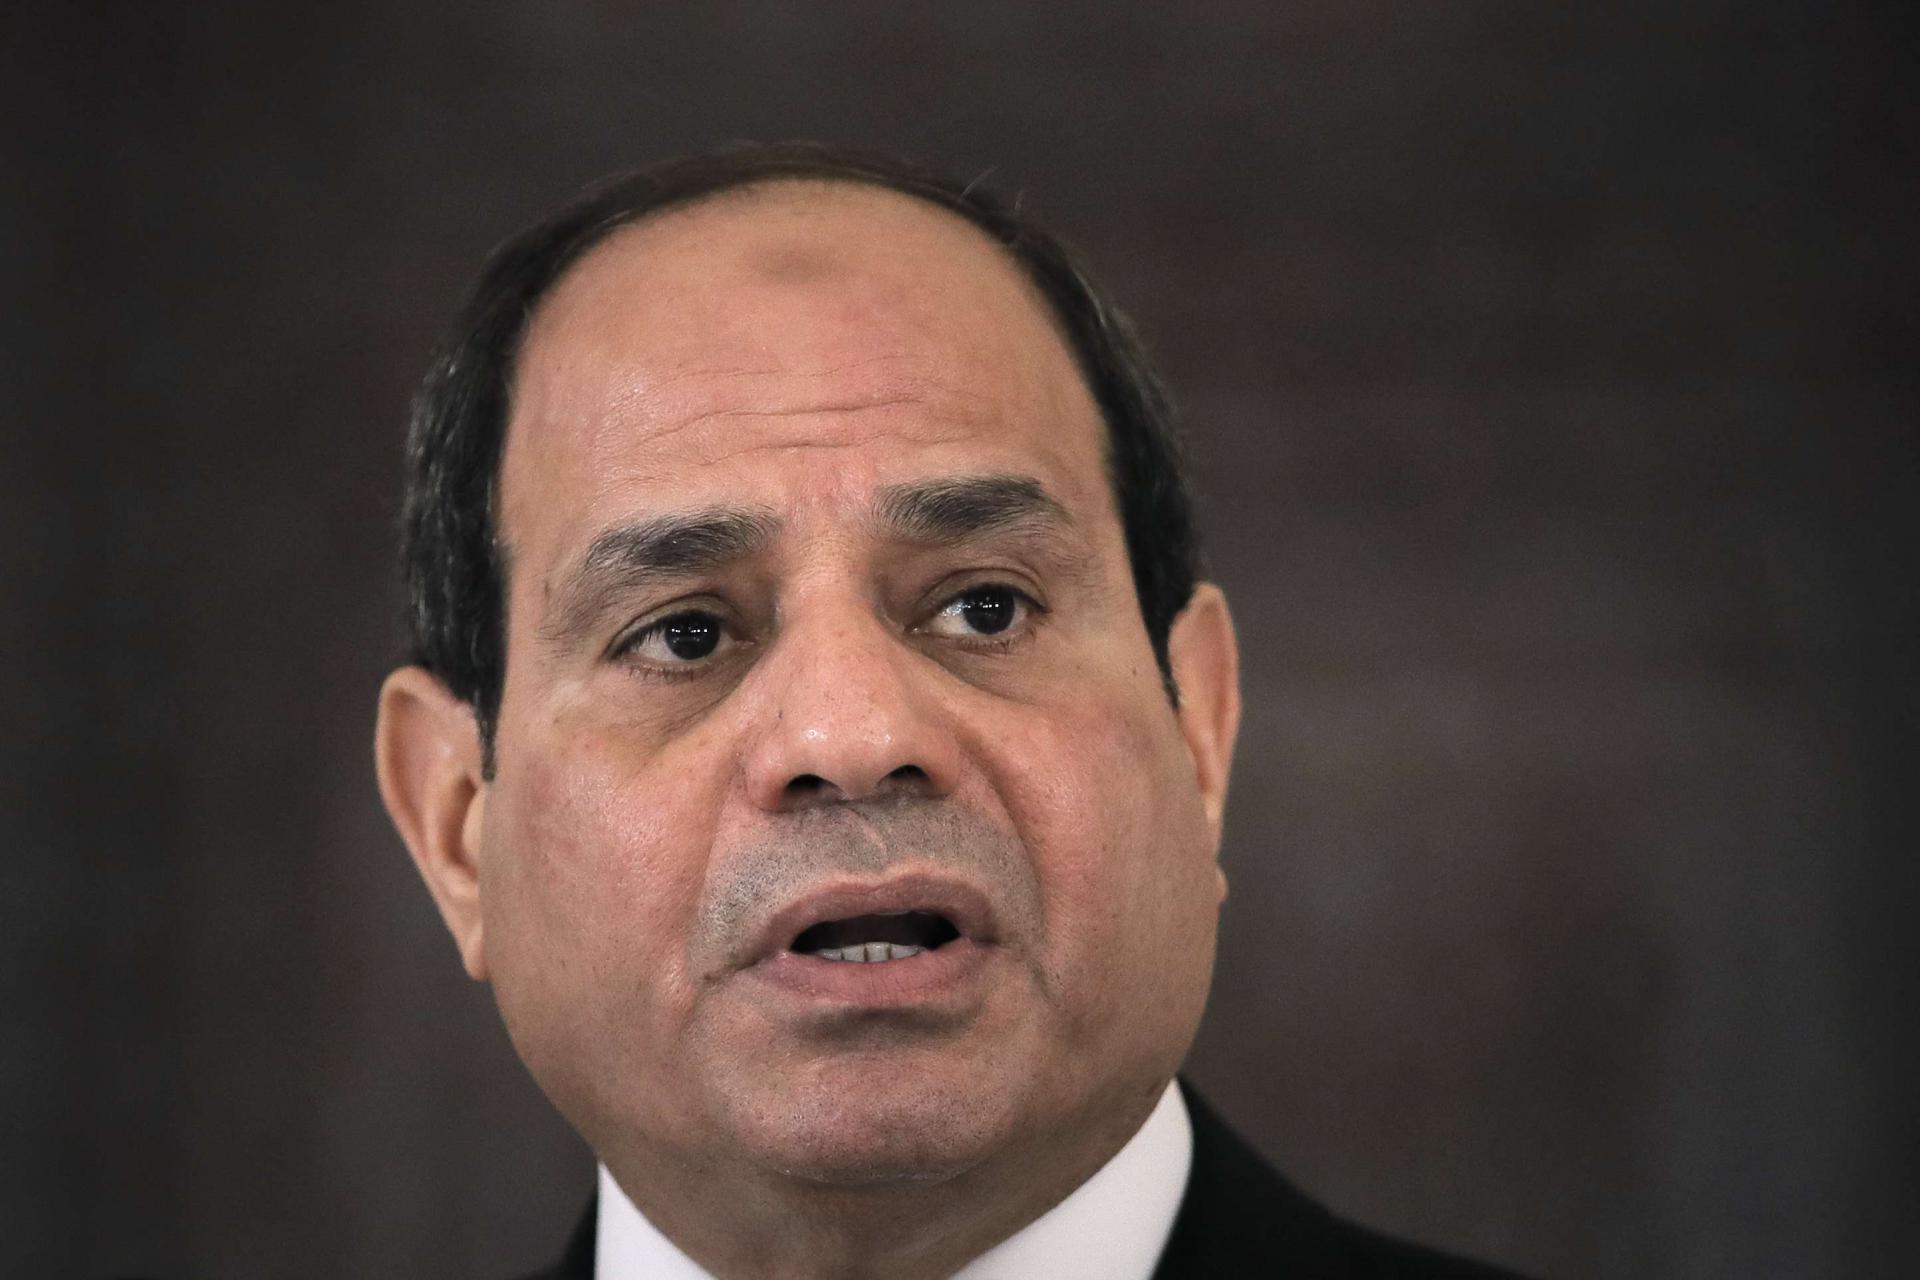 Since President Abdel Fattah al-Sisi took office in 2014, his administration has imposed sweeping economic reforms